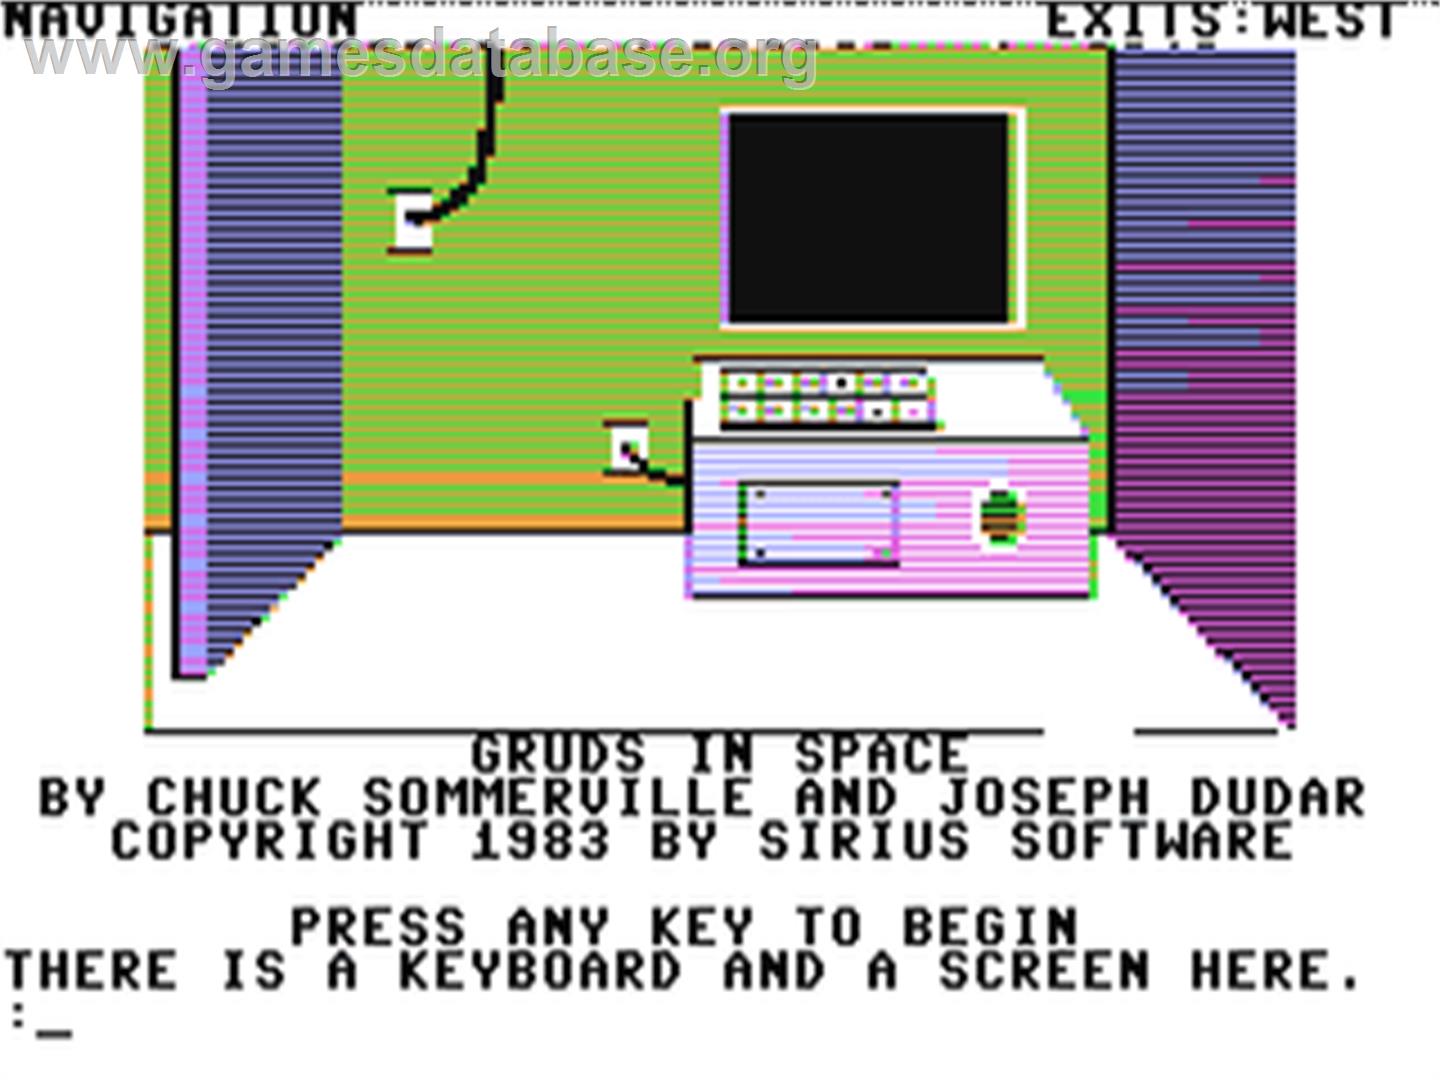 Gruds In Space - Commodore 64 - Artwork - In Game